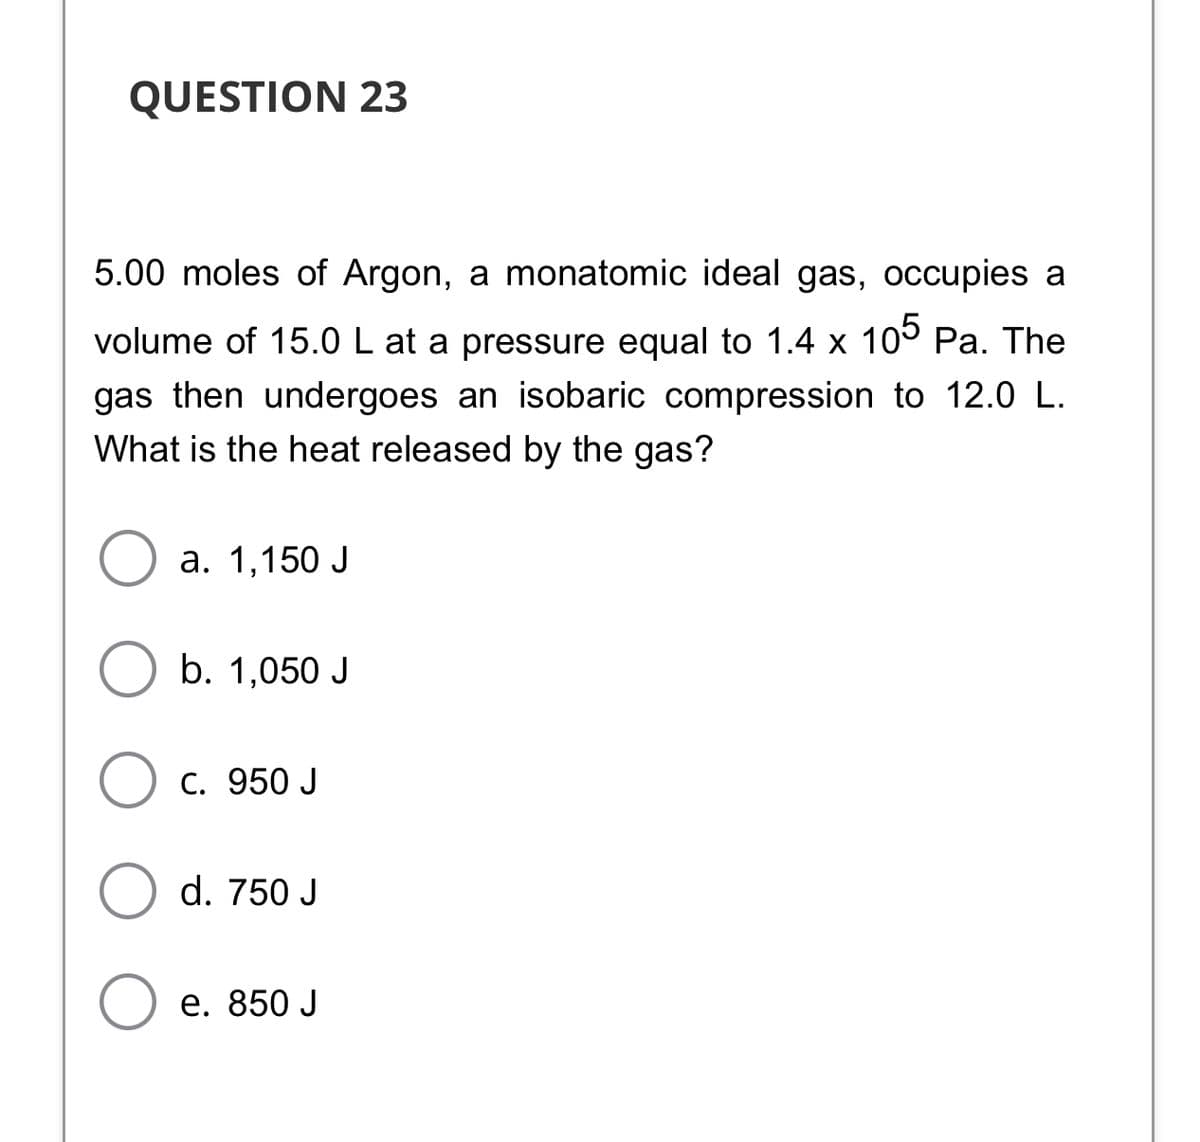 QUESTION 23
5.00 moles of Argon, a monatomic ideal gas, occupies a
volume of 15.0 L at a pressure equal to 1.4 x 10° Pa. The
gas then undergoes an isobaric compression to 12.0 L.
What is the heat released by the gas?
а. 1,150 J
b. 1,050 J
С. 950 J
d. 750 J
e. 850 J
